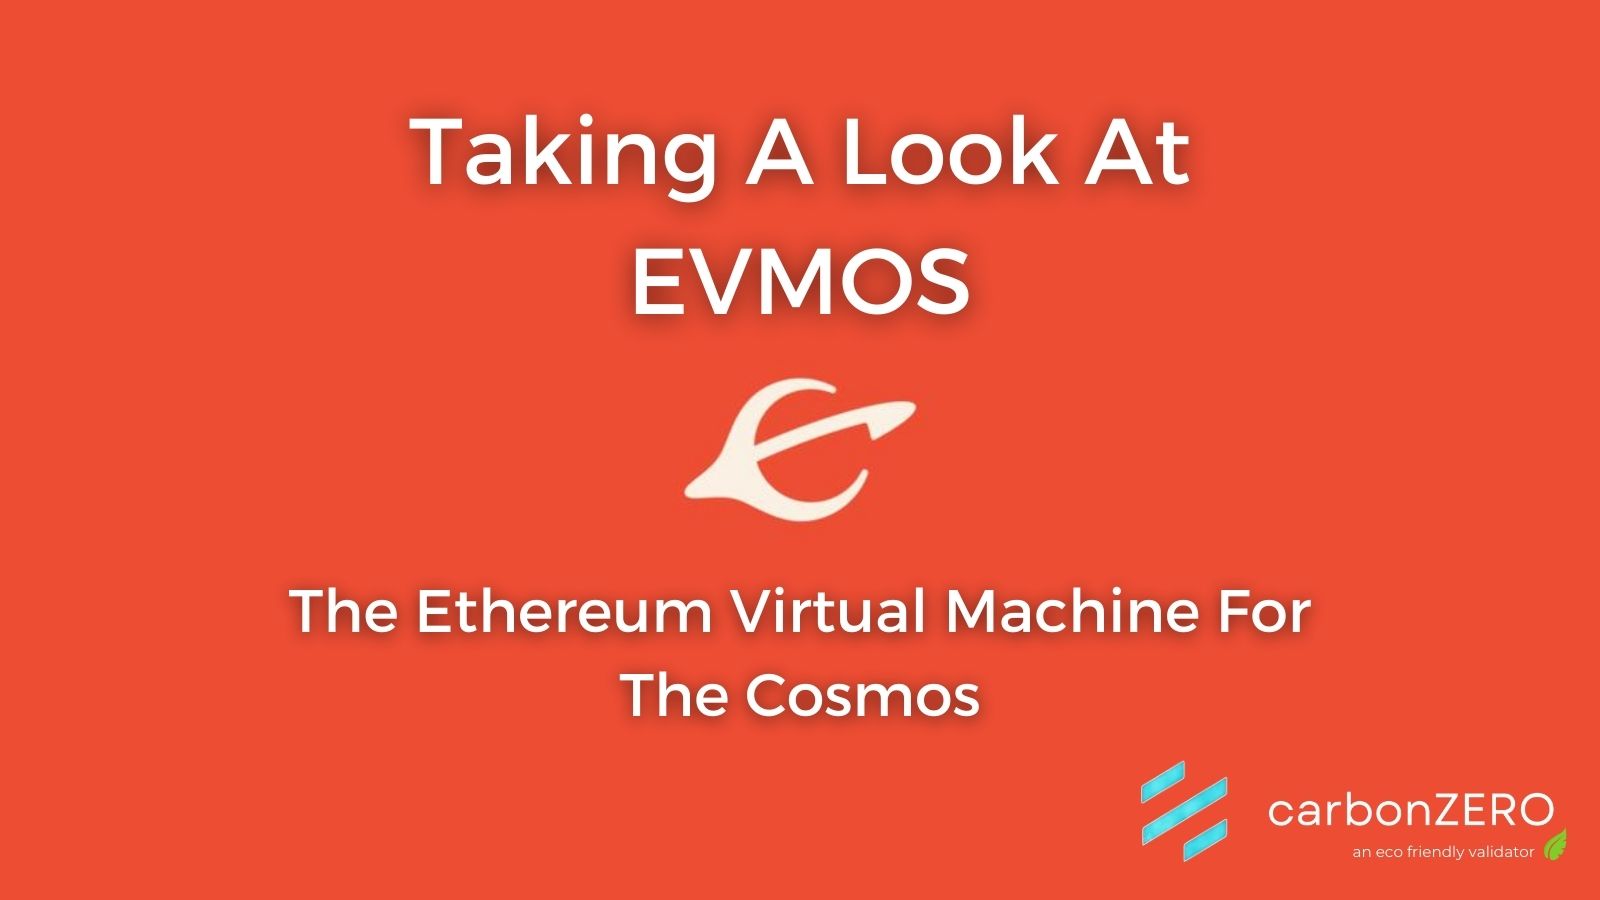 @carbonzerozone/taking-a-look-at-evmos-the-ethereum-virtual-machine-comes-to-the-cosmos